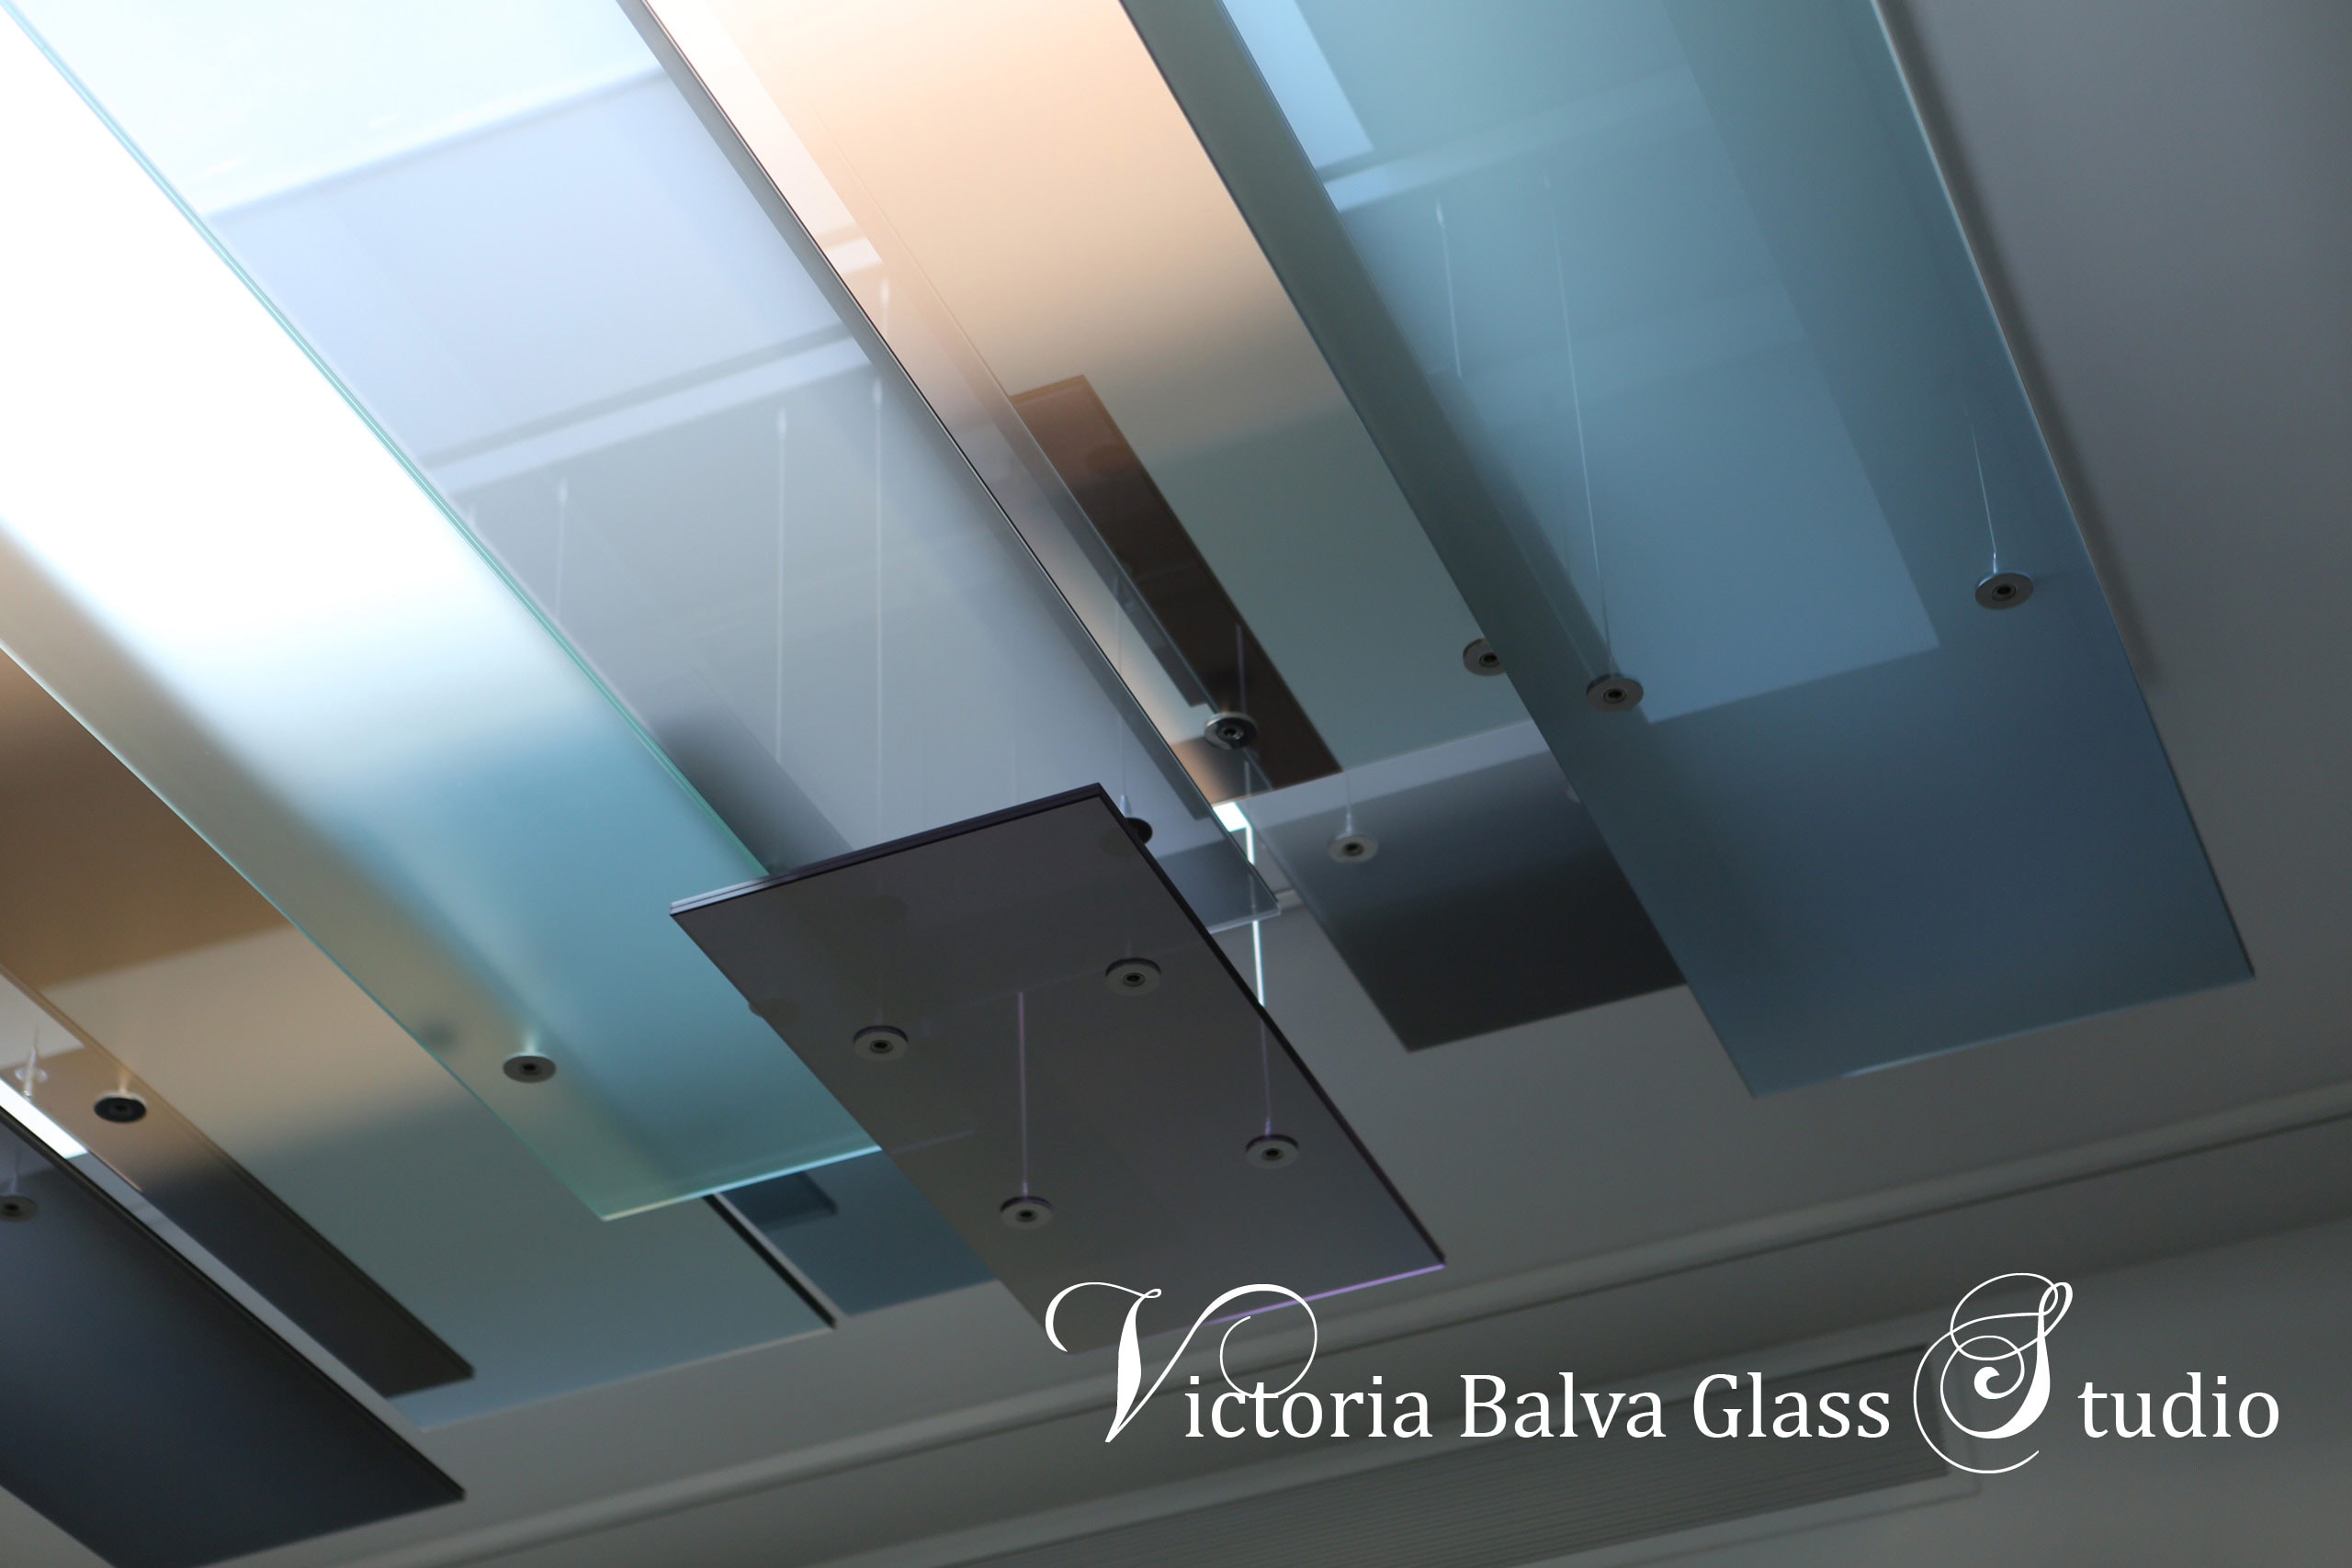 Minimalism style art glass skylight installation for foyer of large modern residence Laminated reflective textured colored glass with polished glass edge suspended on stainless steel hardware and steel cables for contemporary residence in Toronto